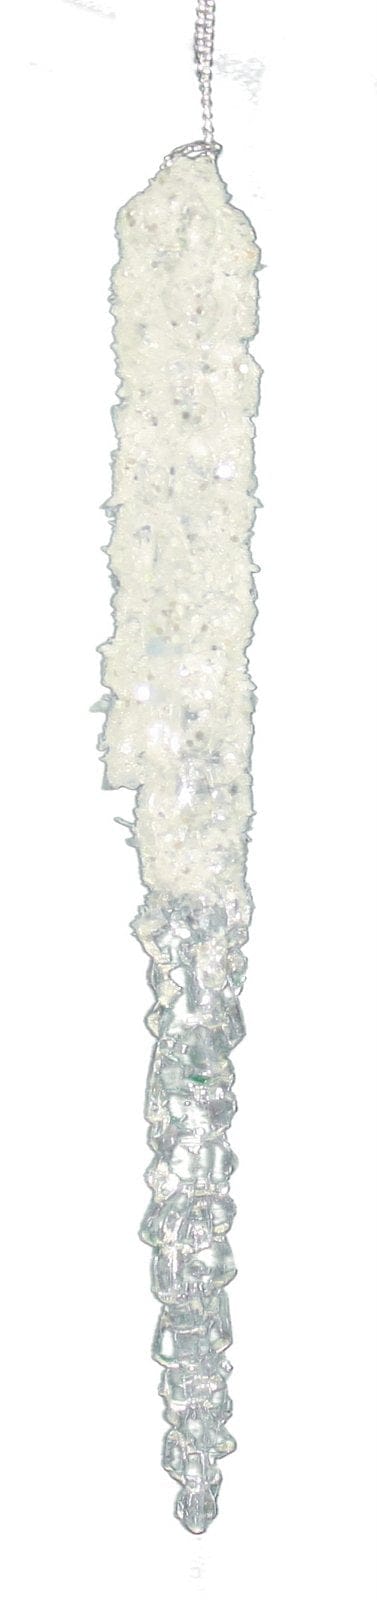 6.5 inch Acrylic Icicle Ornament - 1/2 Frost - Shelburne Country Store